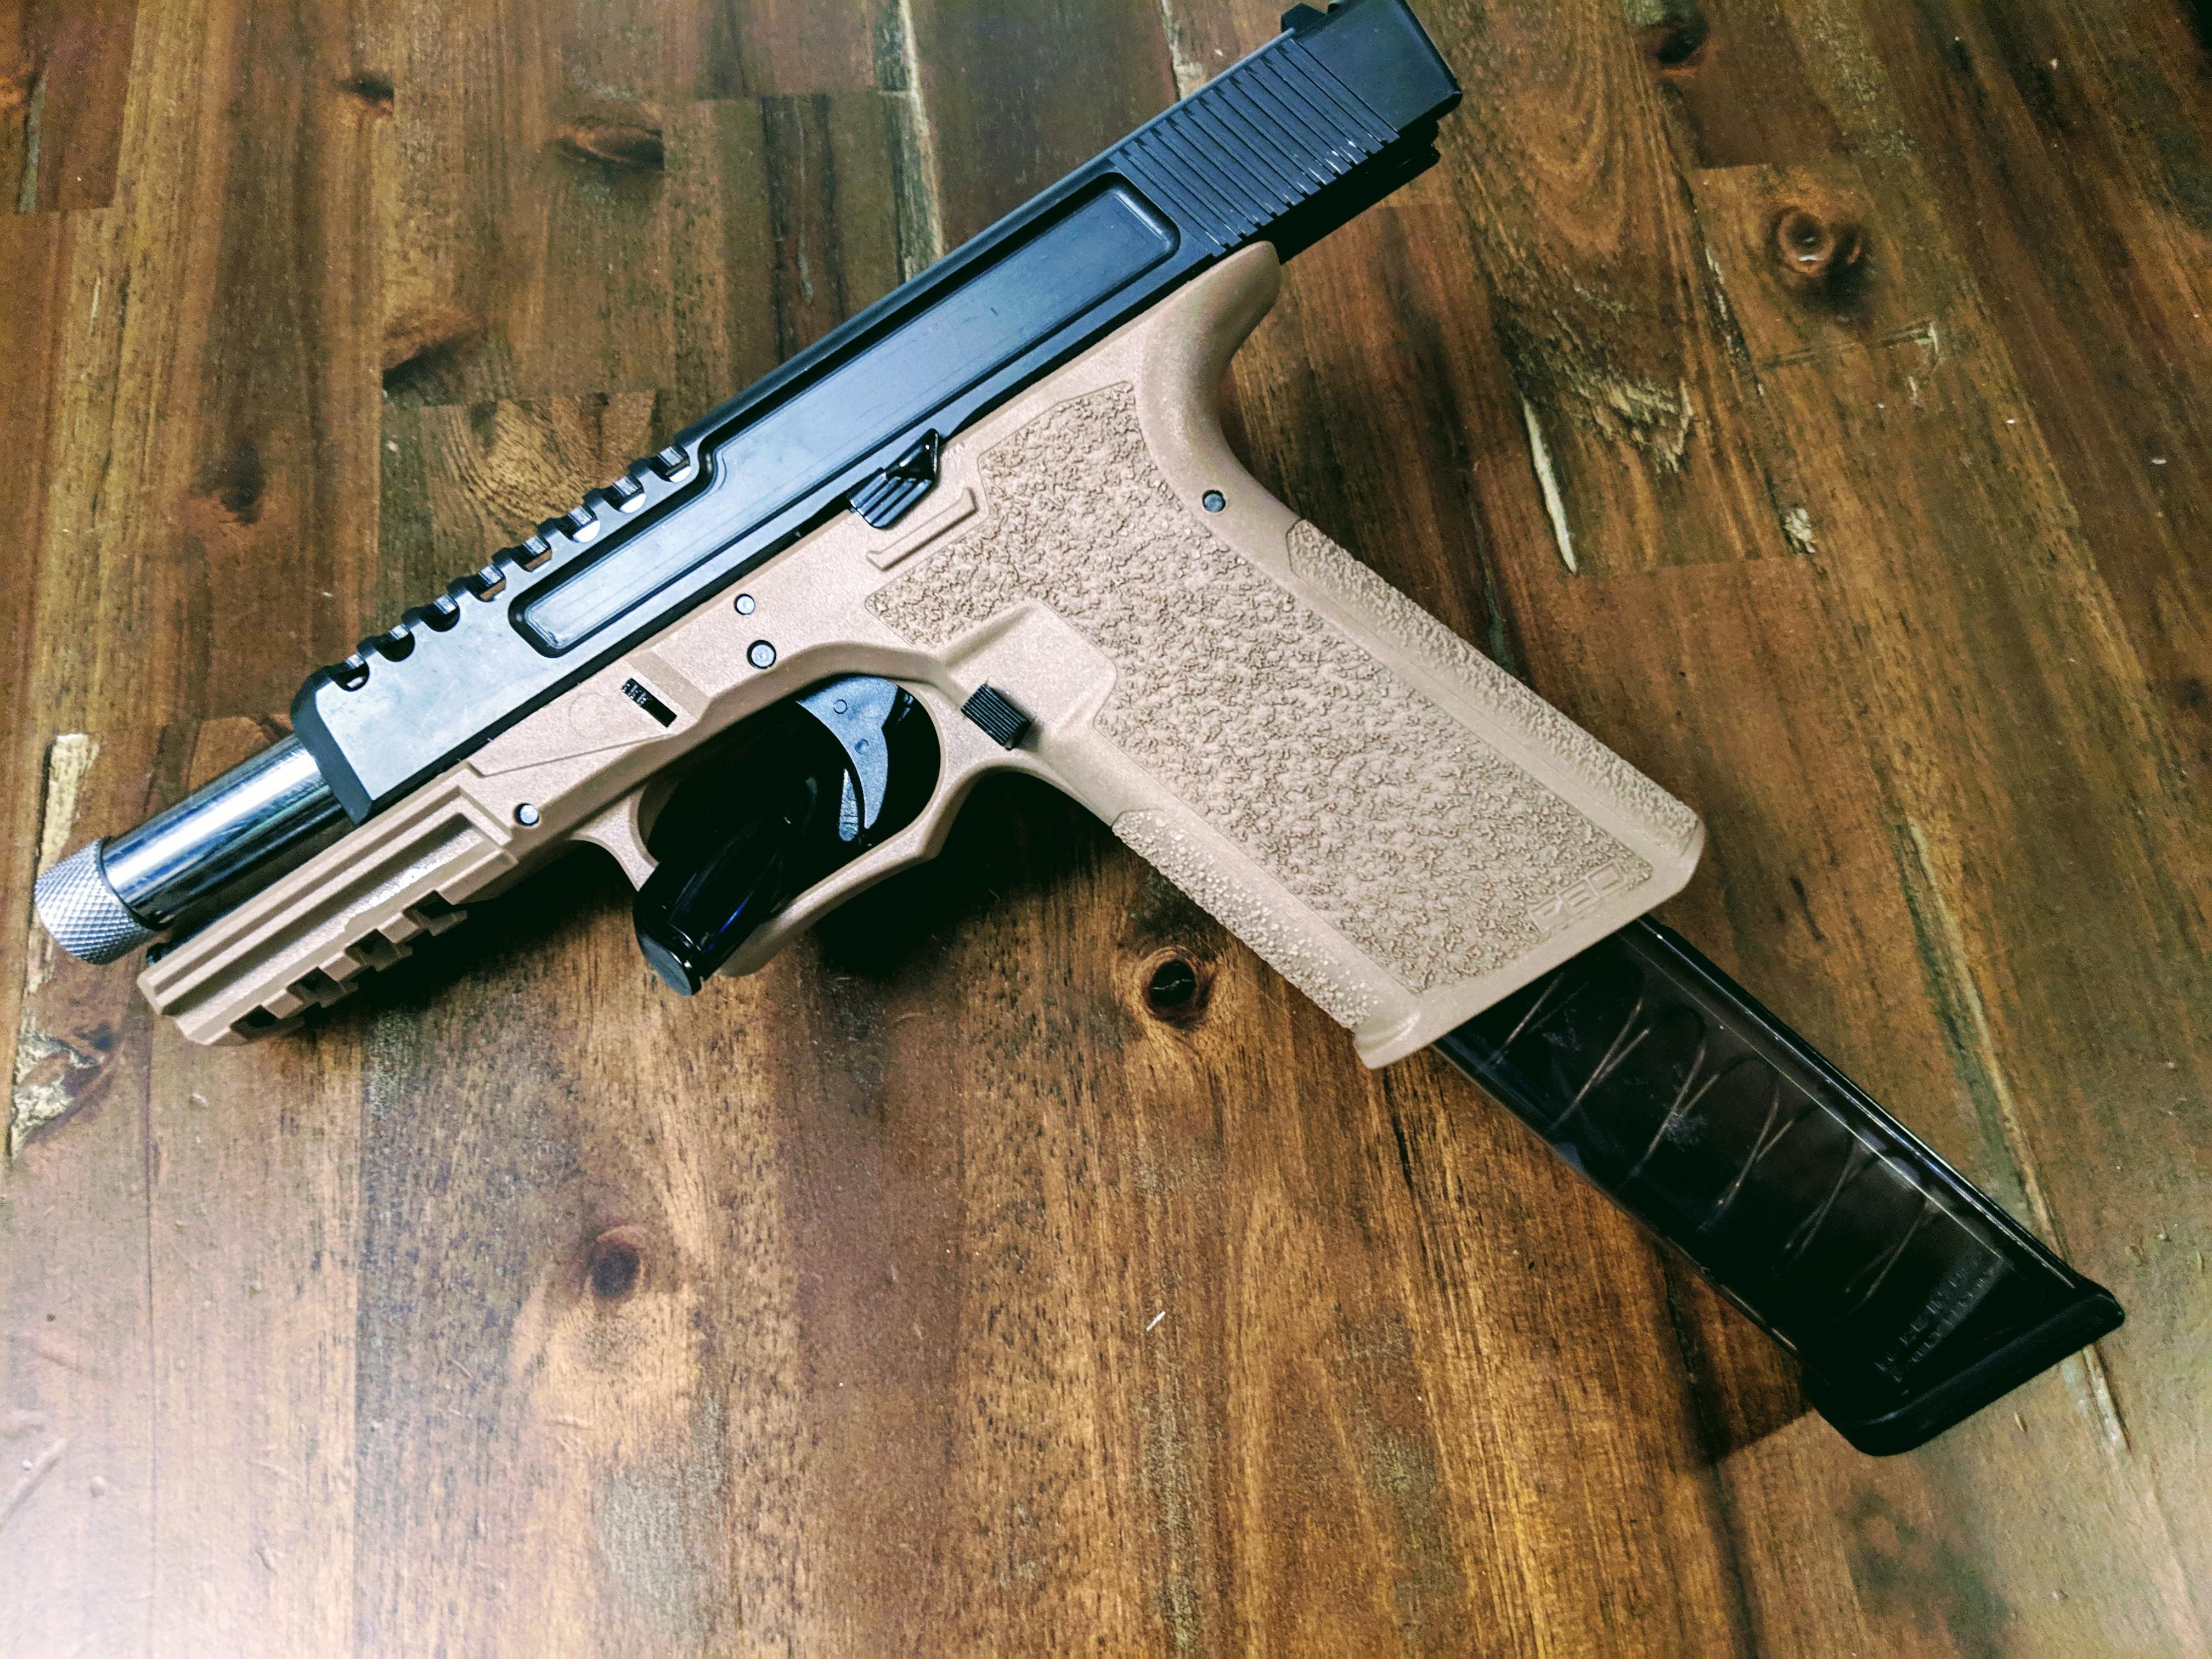 Canine reccomend finish polymer80 start complete build